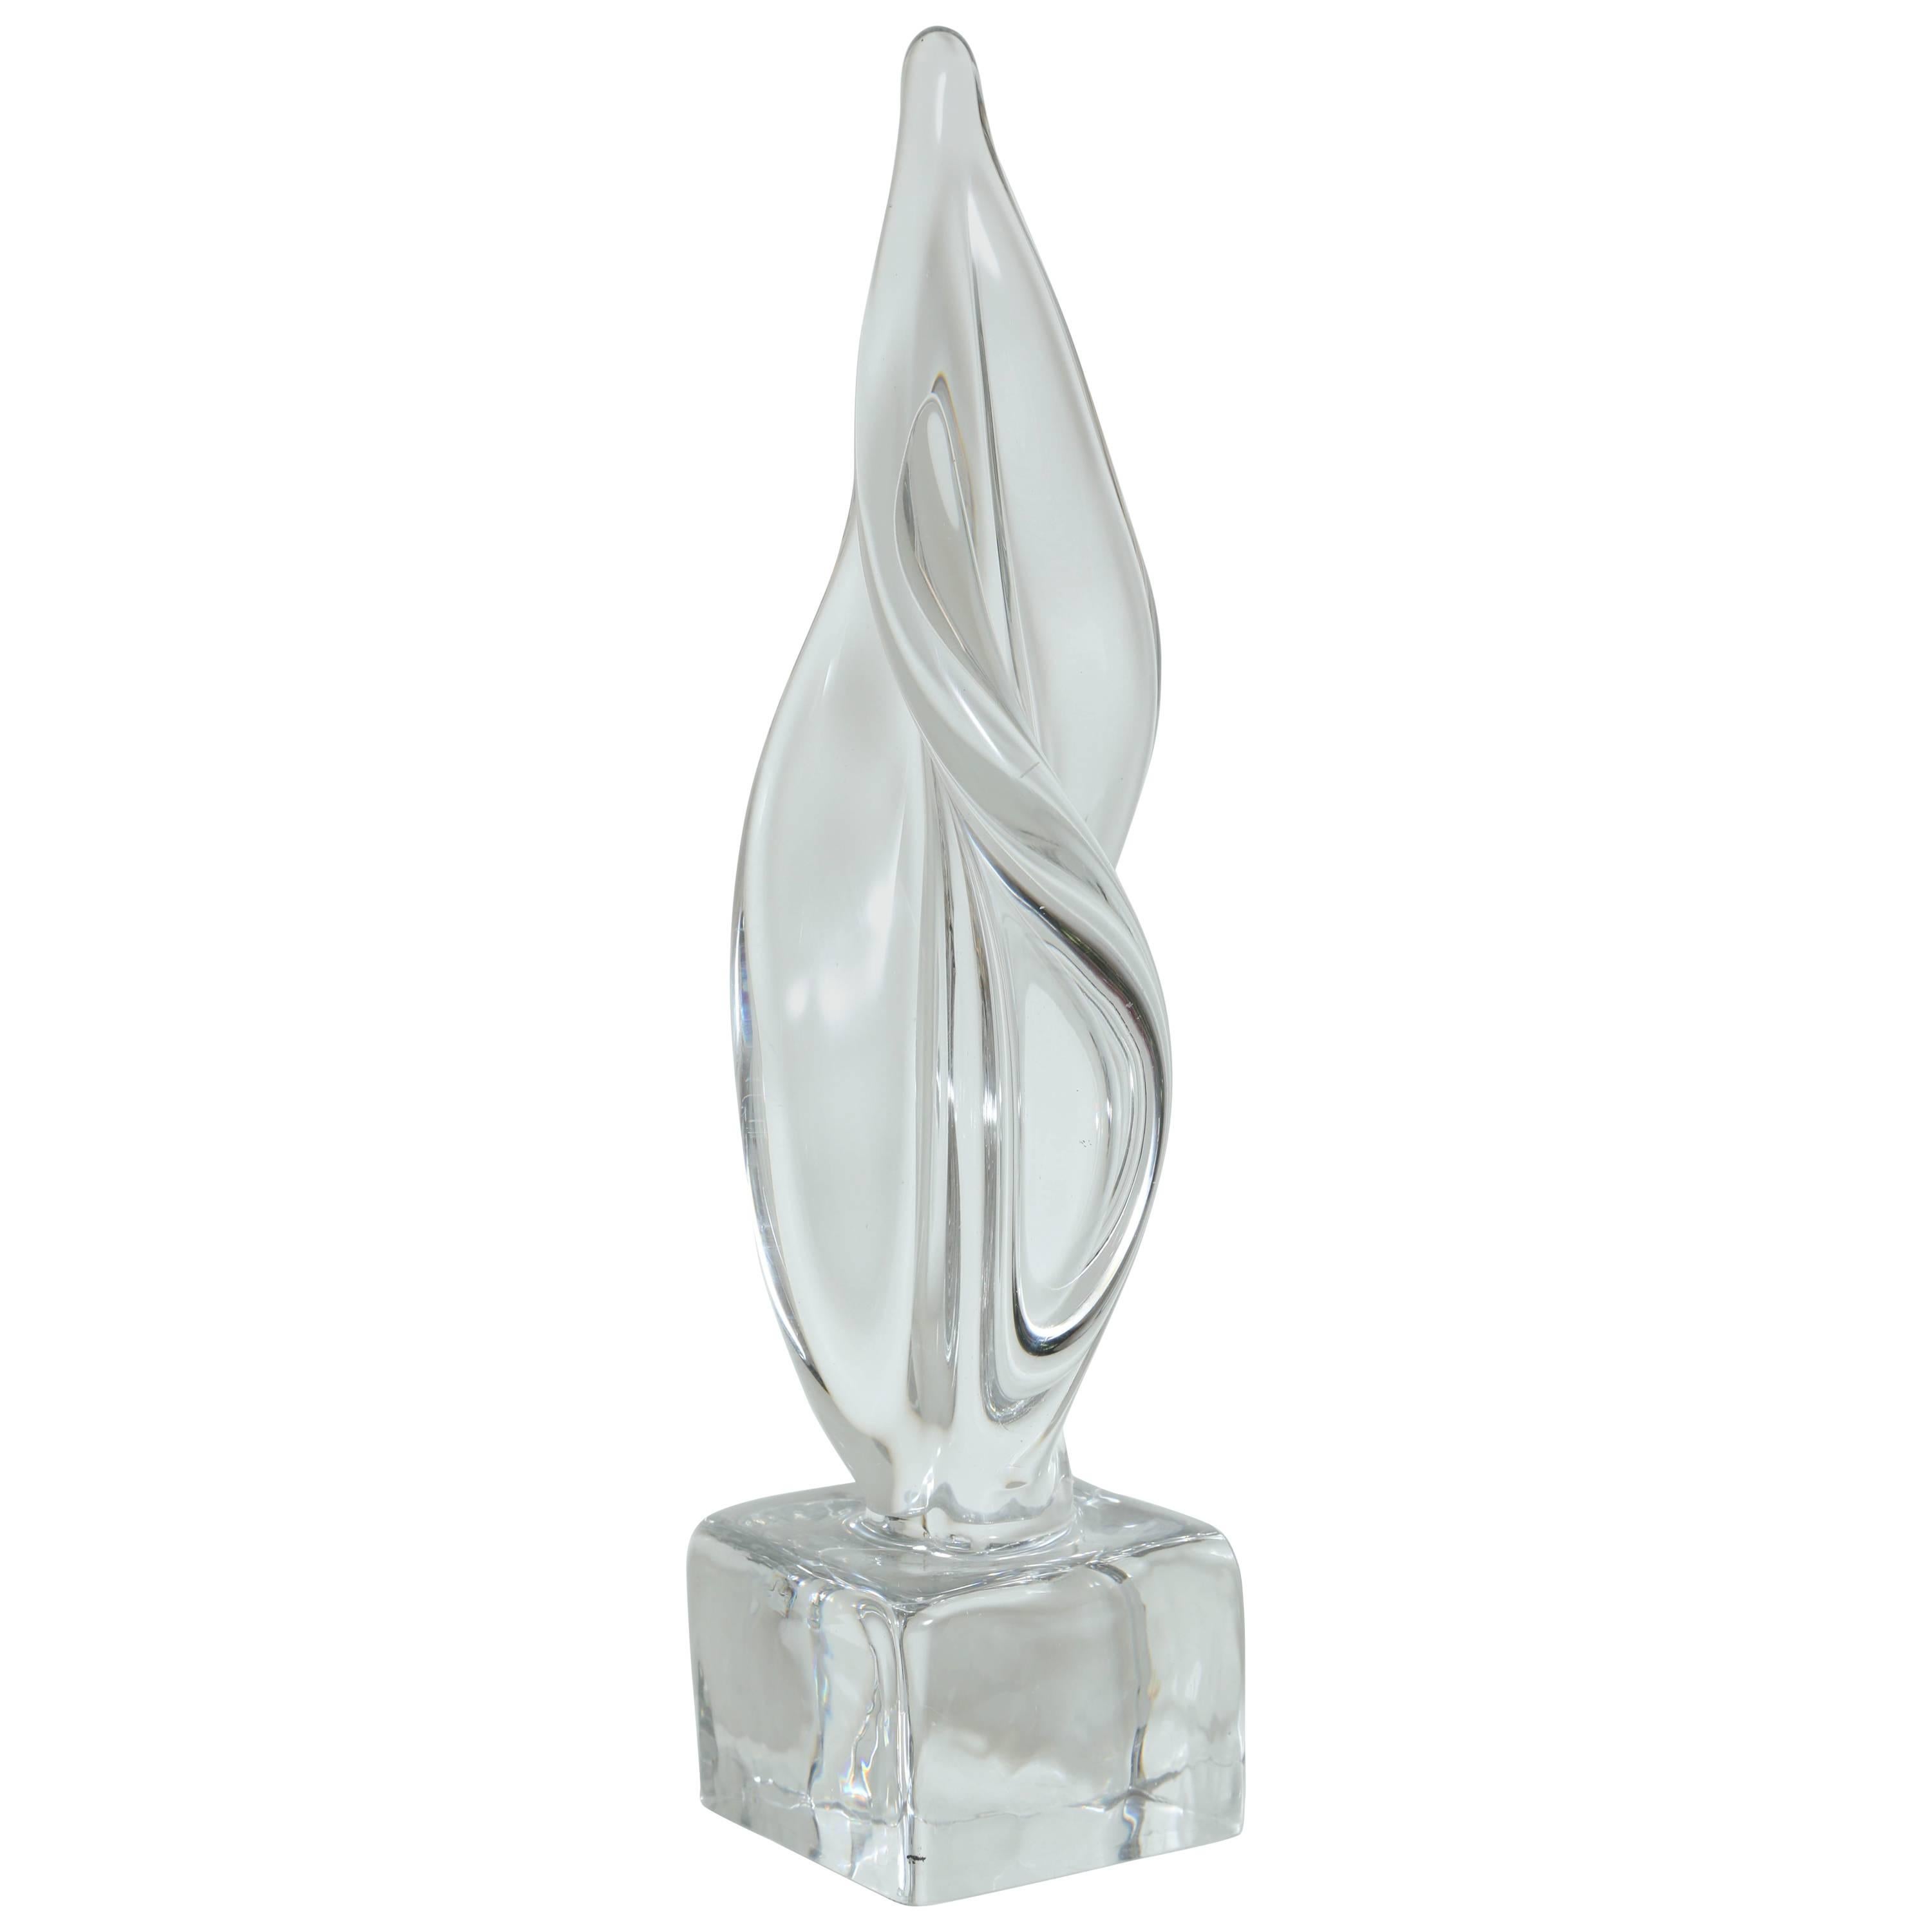 Large Mid-Century Modern abstract sculpture in clear hand blown Murano glass. Sculpture has spiral form with amorphous design reminiscent of a fire flame, and features square solid glass pedestal base.